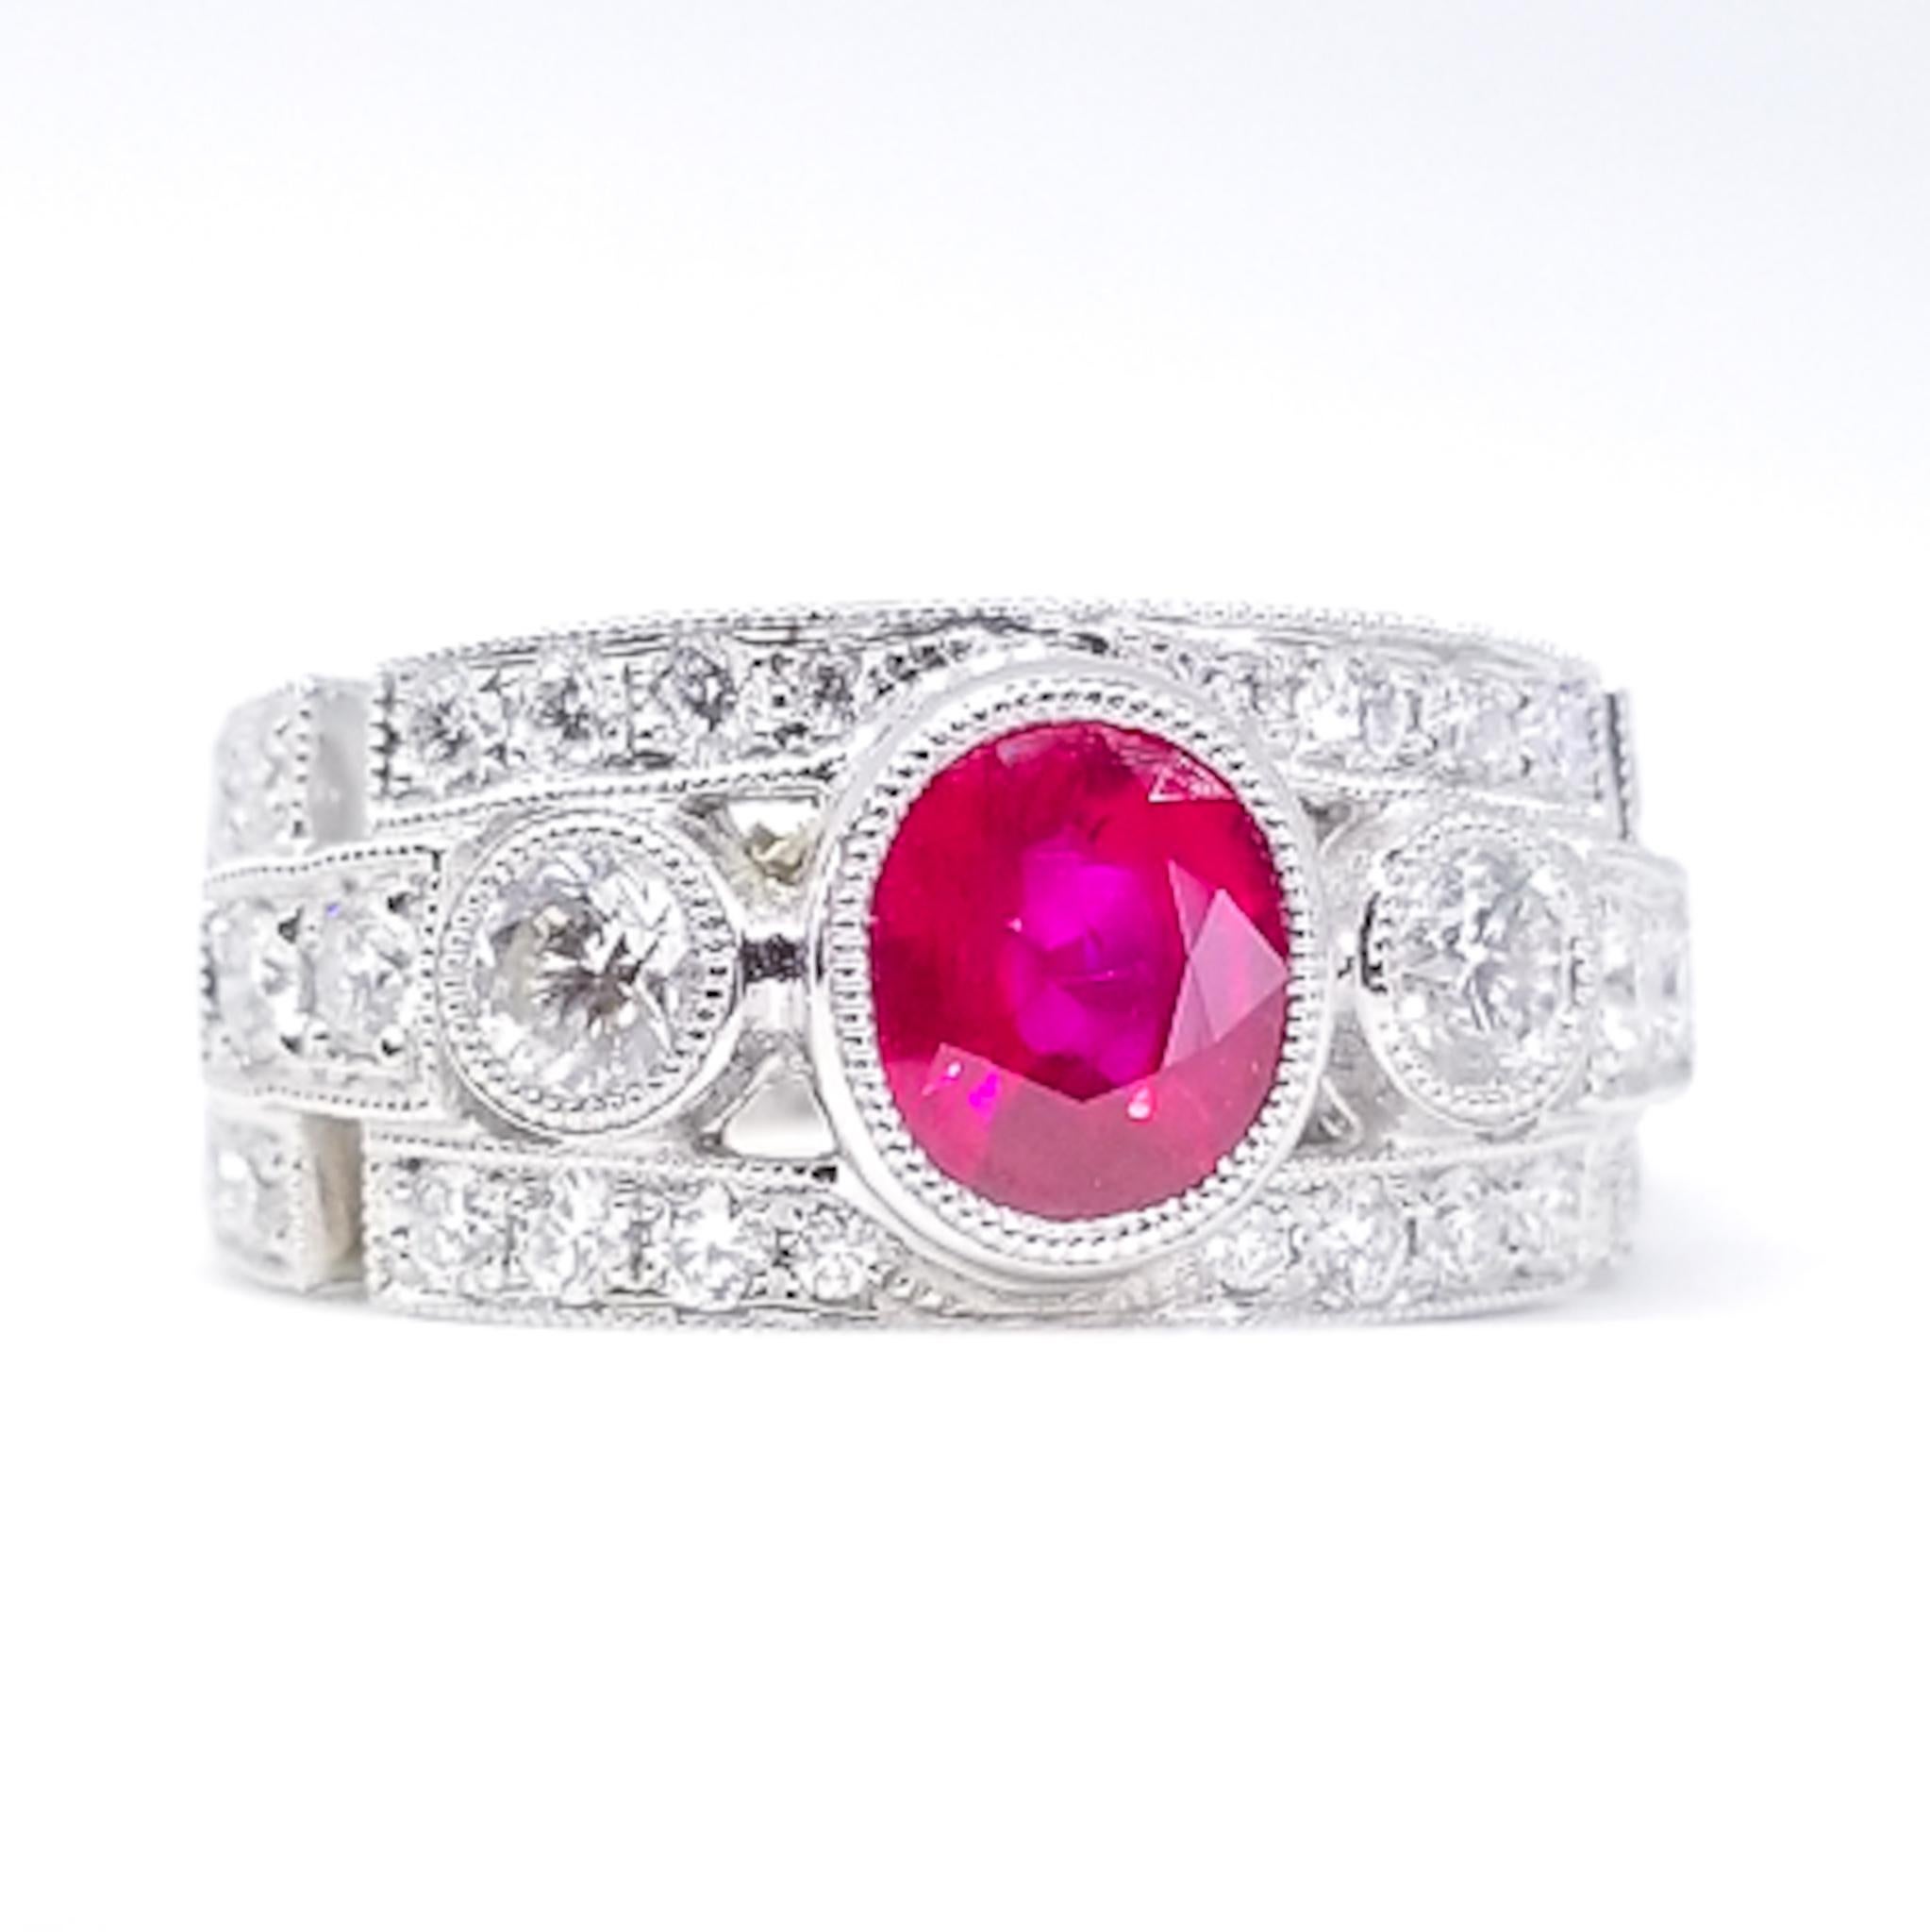 An Art Deco Inspired Engagement, Anniversary or Right Hand Ring is set with a 1.52 Carat Oval Ruby with Rich Red Pink Color Saturation. The Gem Quality stone is set low in the Band Style Ring in a protective bezel of Hand Millegrained White Gold.